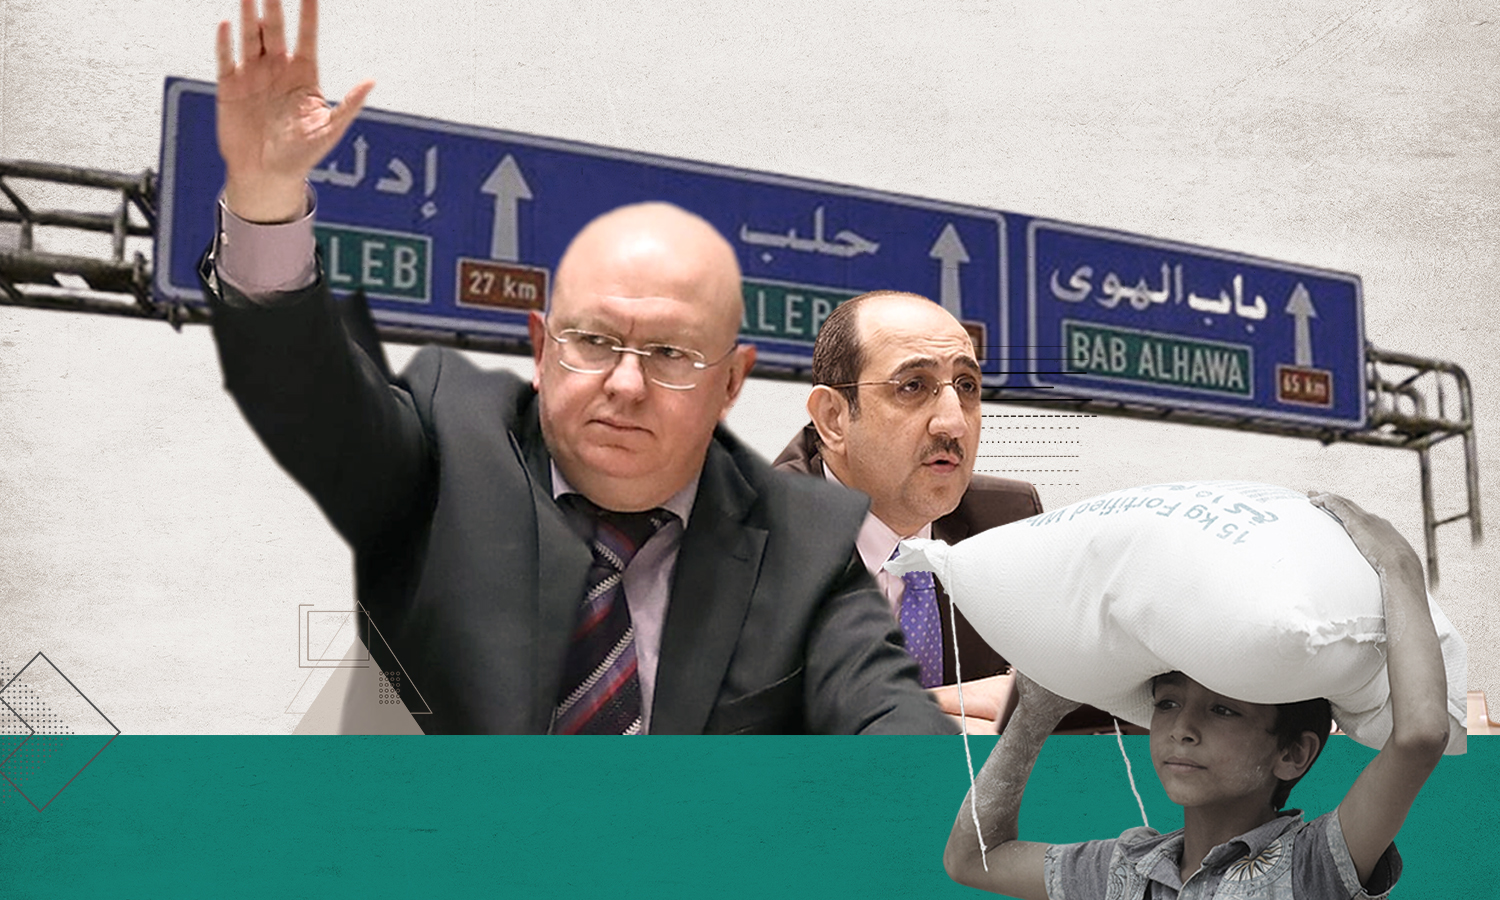 Vasily Nebenzya, Russia’s Permanent Representative to the United Nations and the Permanent Representative of the Syrian regime to the UN, Bassam Sabbagh (Edited by Enab Baladi)